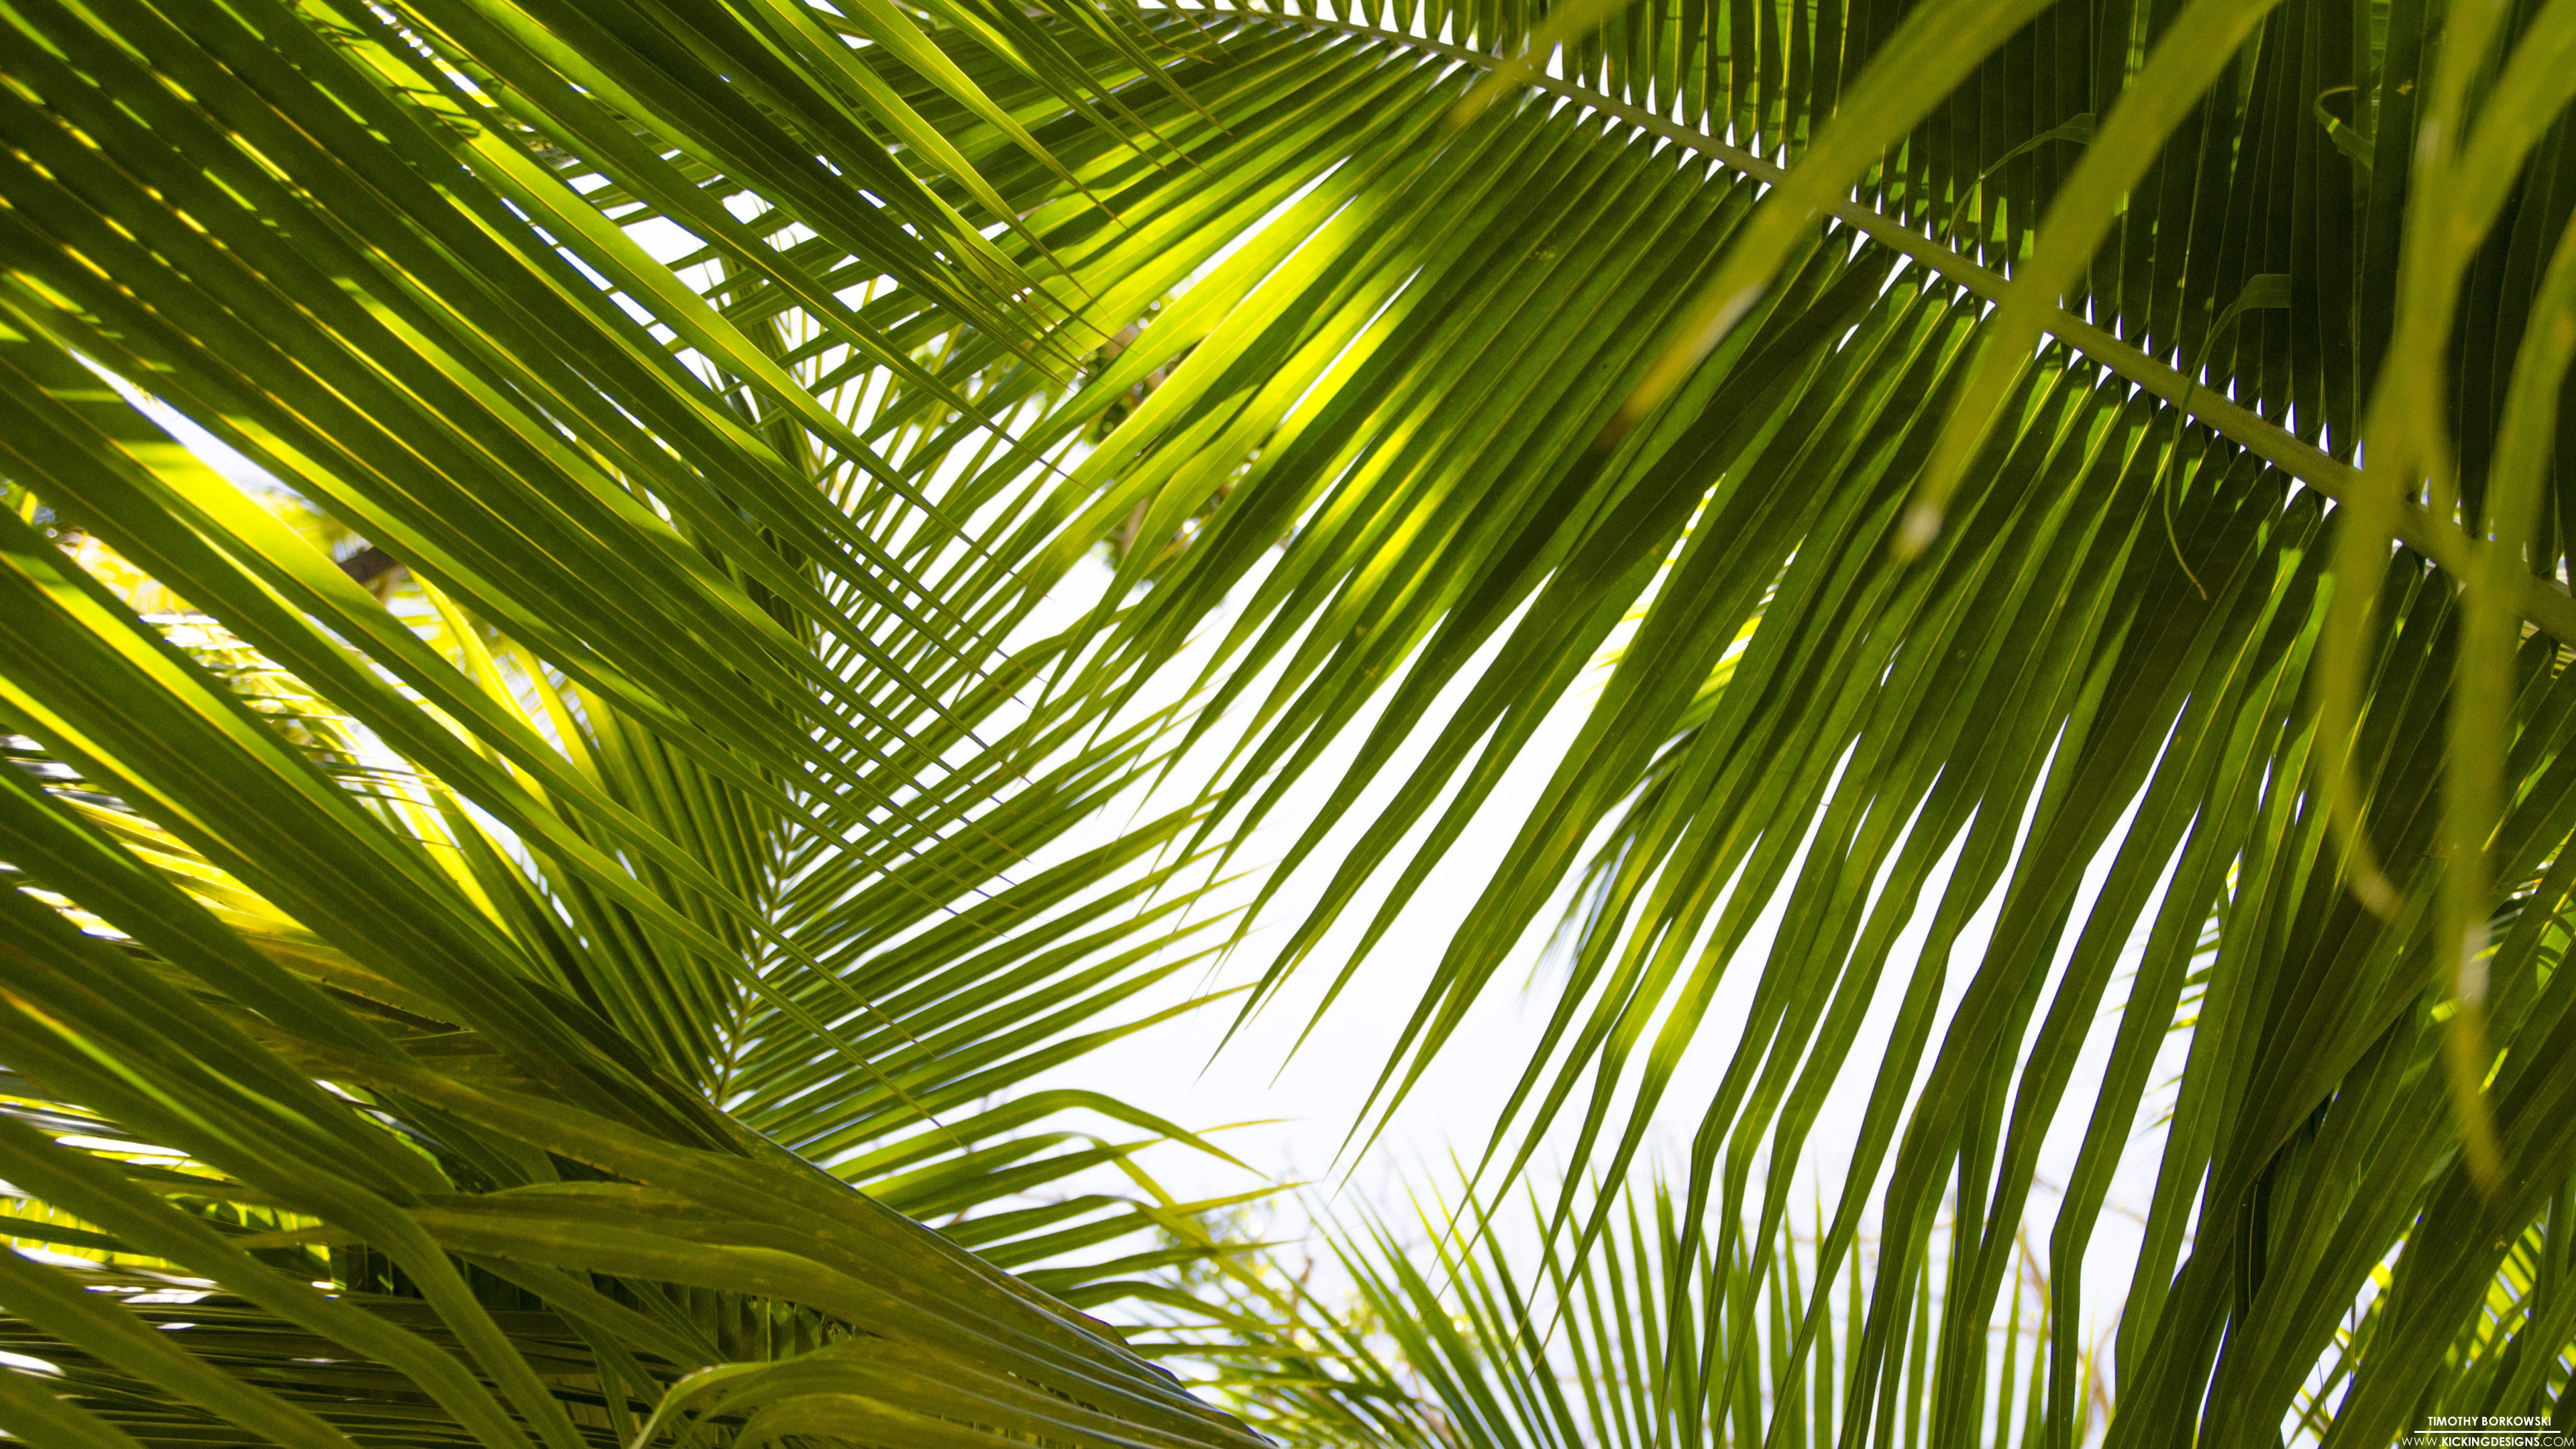 Tropical Leaves 9-17-2015 Wallpaper Background | Kicking Designs